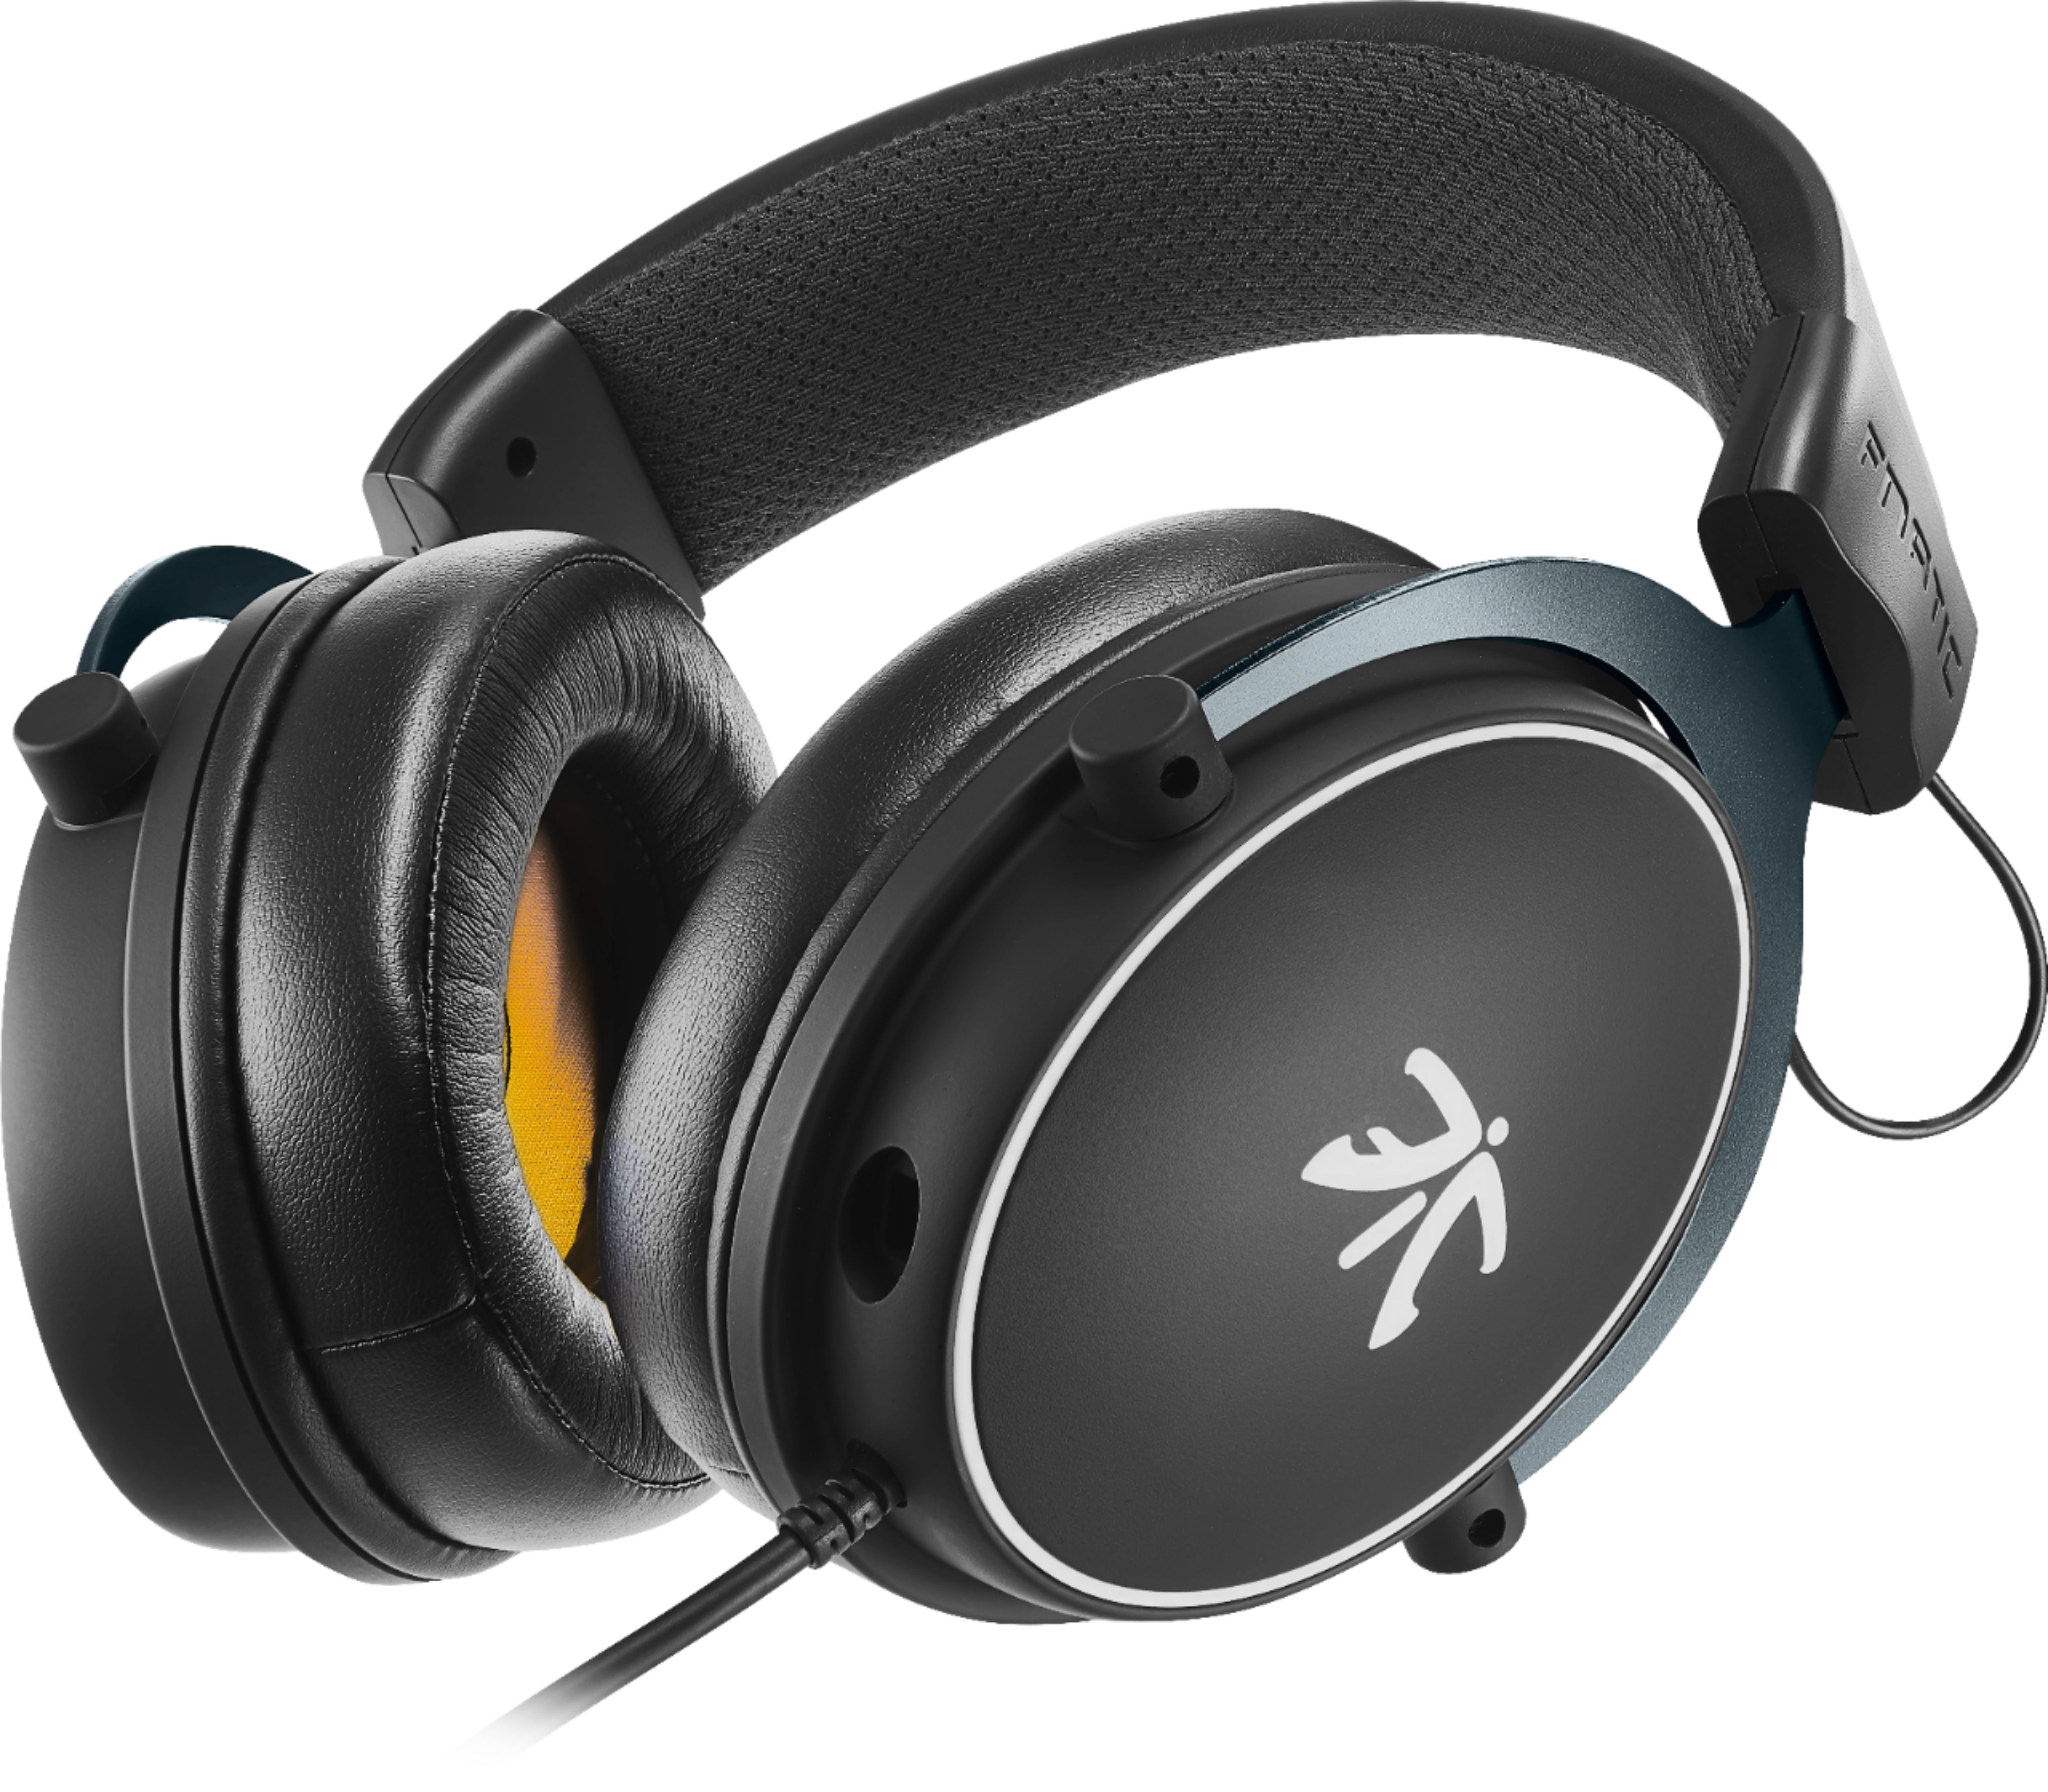 Fnatic React review: An awesomely affordable 3.5mm gaming headset? 